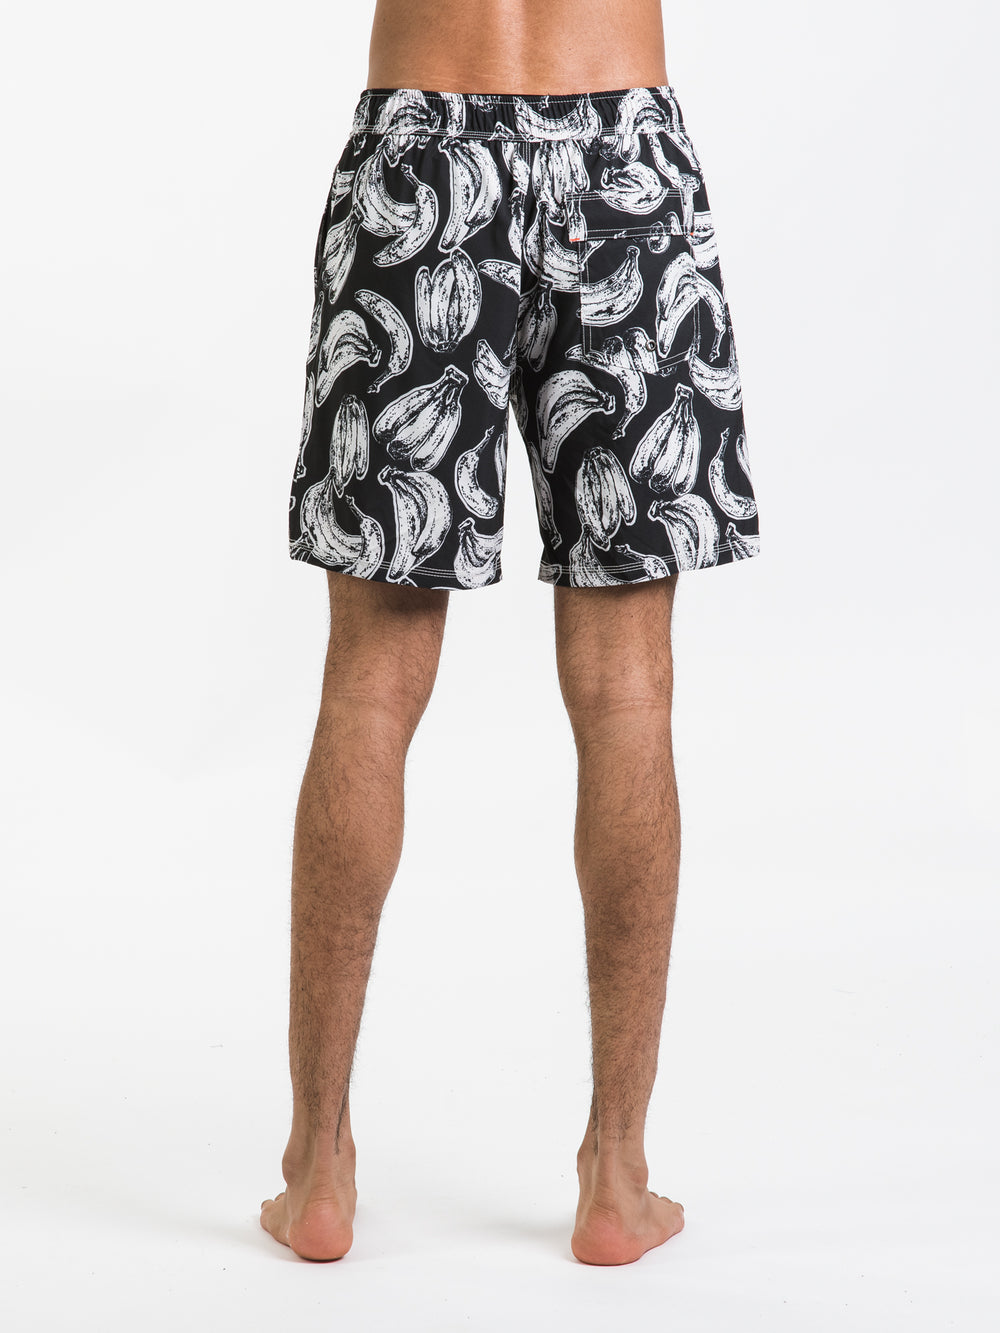 SAXX OH BUOY 2-in-1 7" VOLLEY SHORTS - CLEARANCE